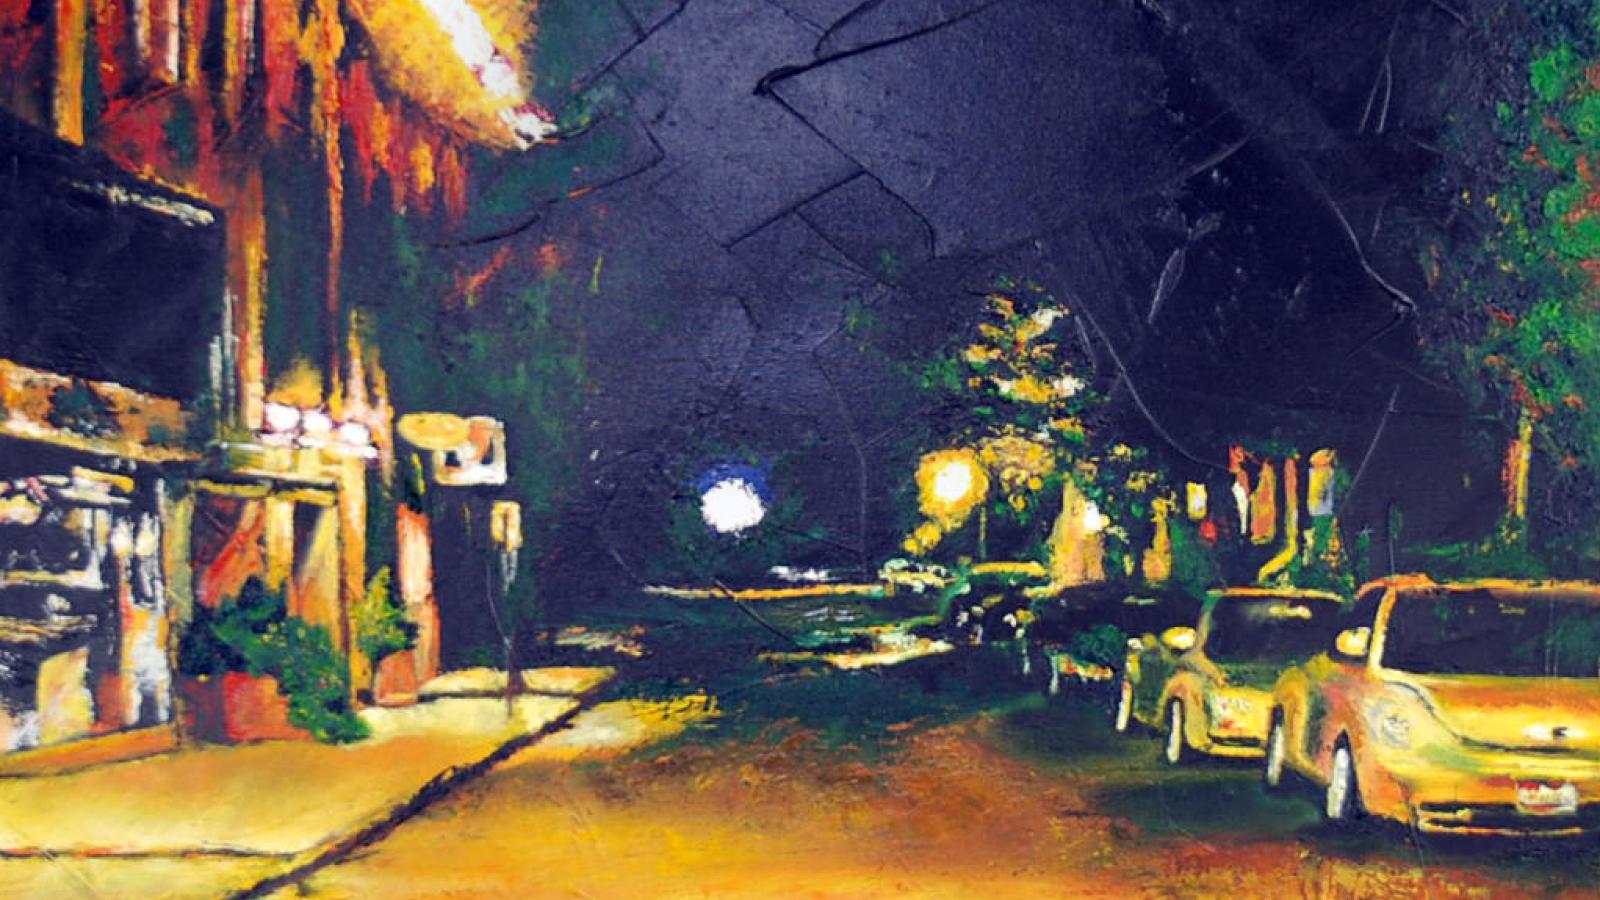 2009 Best in Show: Alley, oil with palette knife on canvas, Polly Isurin